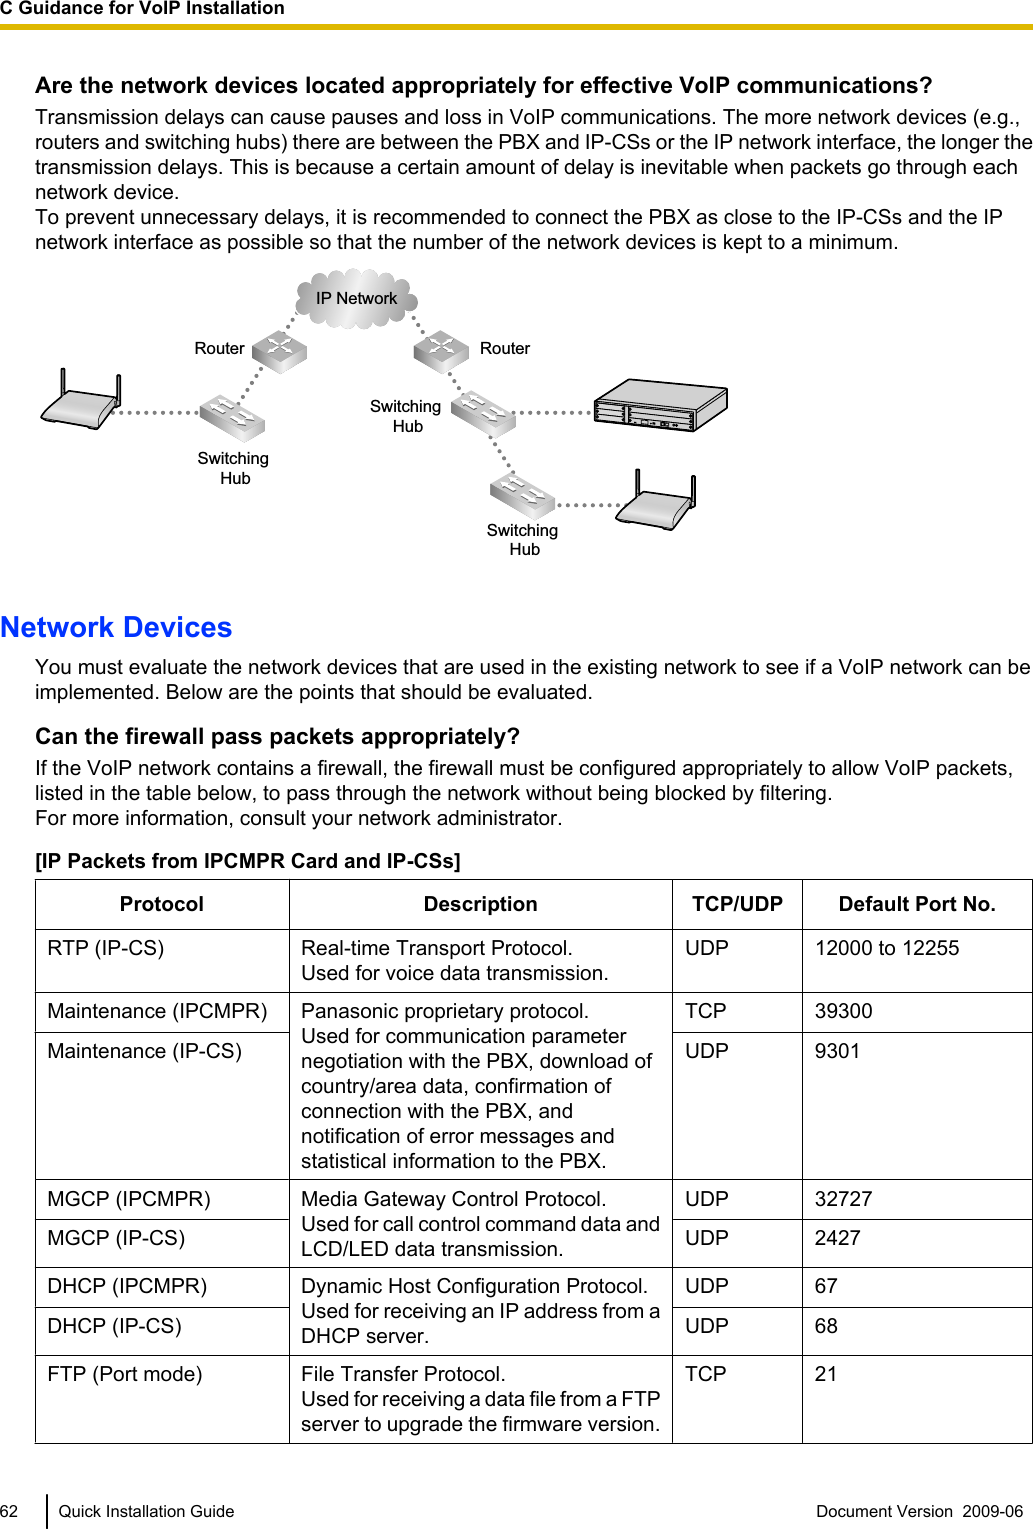 Are the network devices located appropriately for effective VoIP communications?Transmission delays can cause pauses and loss in VoIP communications. The more network devices (e.g.,routers and switching hubs) there are between the PBX and IP-CSs or the IP network interface, the longer thetransmission delays. This is because a certain amount of delay is inevitable when packets go through eachnetwork device.To prevent unnecessary delays, it is recommended to connect the PBX as close to the IP-CSs and the IPnetwork interface as possible so that the number of the network devices is kept to a minimum.IP NetworkRouterRouterSwitching HubSwitching HubSwitching HubNetwork DevicesYou must evaluate the network devices that are used in the existing network to see if a VoIP network can beimplemented. Below are the points that should be evaluated.Can the firewall pass packets appropriately?If the VoIP network contains a firewall, the firewall must be configured appropriately to allow VoIP packets,listed in the table below, to pass through the network without being blocked by filtering.For more information, consult your network administrator.[IP Packets from IPCMPR Card and IP-CSs]Protocol Description TCP/UDP Default Port No.RTP (IP-CS) Real-time Transport Protocol.Used for voice data transmission.UDP 12000 to 12255Maintenance (IPCMPR) Panasonic proprietary protocol.Used for communication parameternegotiation with the PBX, download ofcountry/area data, confirmation ofconnection with the PBX, andnotification of error messages andstatistical information to the PBX.TCP 39300Maintenance (IP-CS) UDP 9301MGCP (IPCMPR) Media Gateway Control Protocol.Used for call control command data andLCD/LED data transmission.UDP 32727MGCP (IP-CS) UDP 2427DHCP (IPCMPR) Dynamic Host Configuration Protocol.Used for receiving an IP address from aDHCP server.UDP 67DHCP (IP-CS) UDP 68FTP (Port mode) File Transfer Protocol.Used for receiving a data file from a FTPserver to upgrade the firmware version.TCP 2162 Quick Installation Guide Document Version  2009-06  C Guidance for VoIP Installation